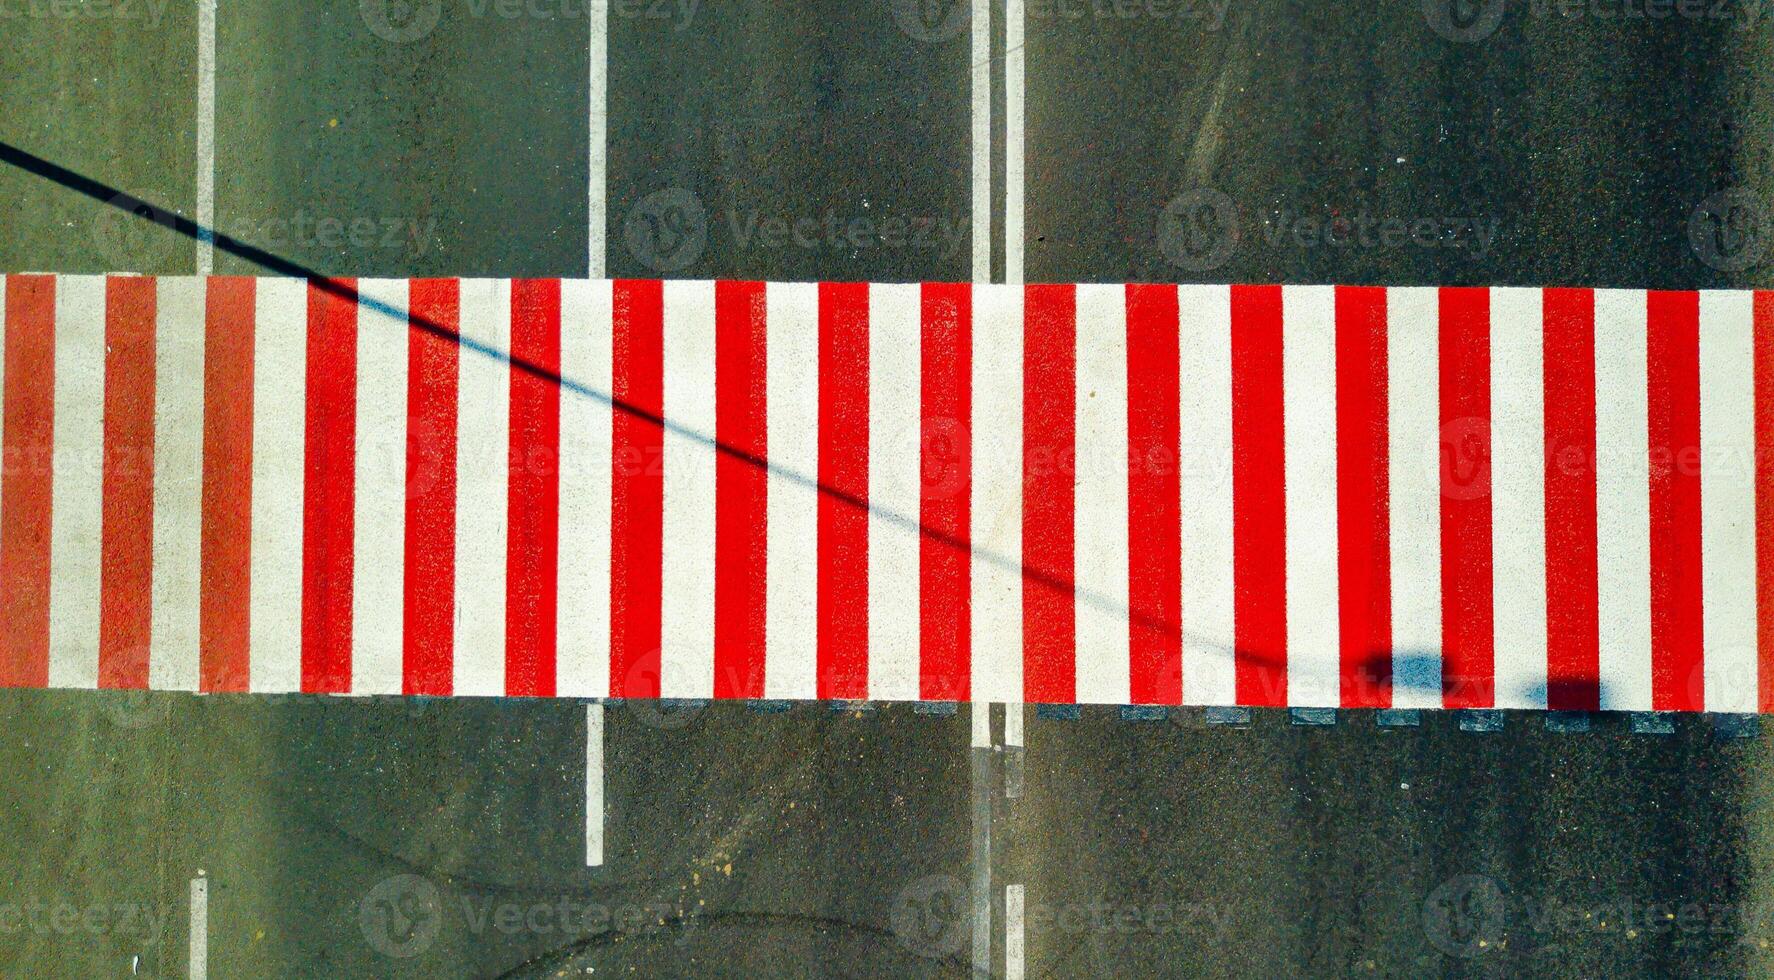 a new pedestrian road in white and red stripes. Close-up photo